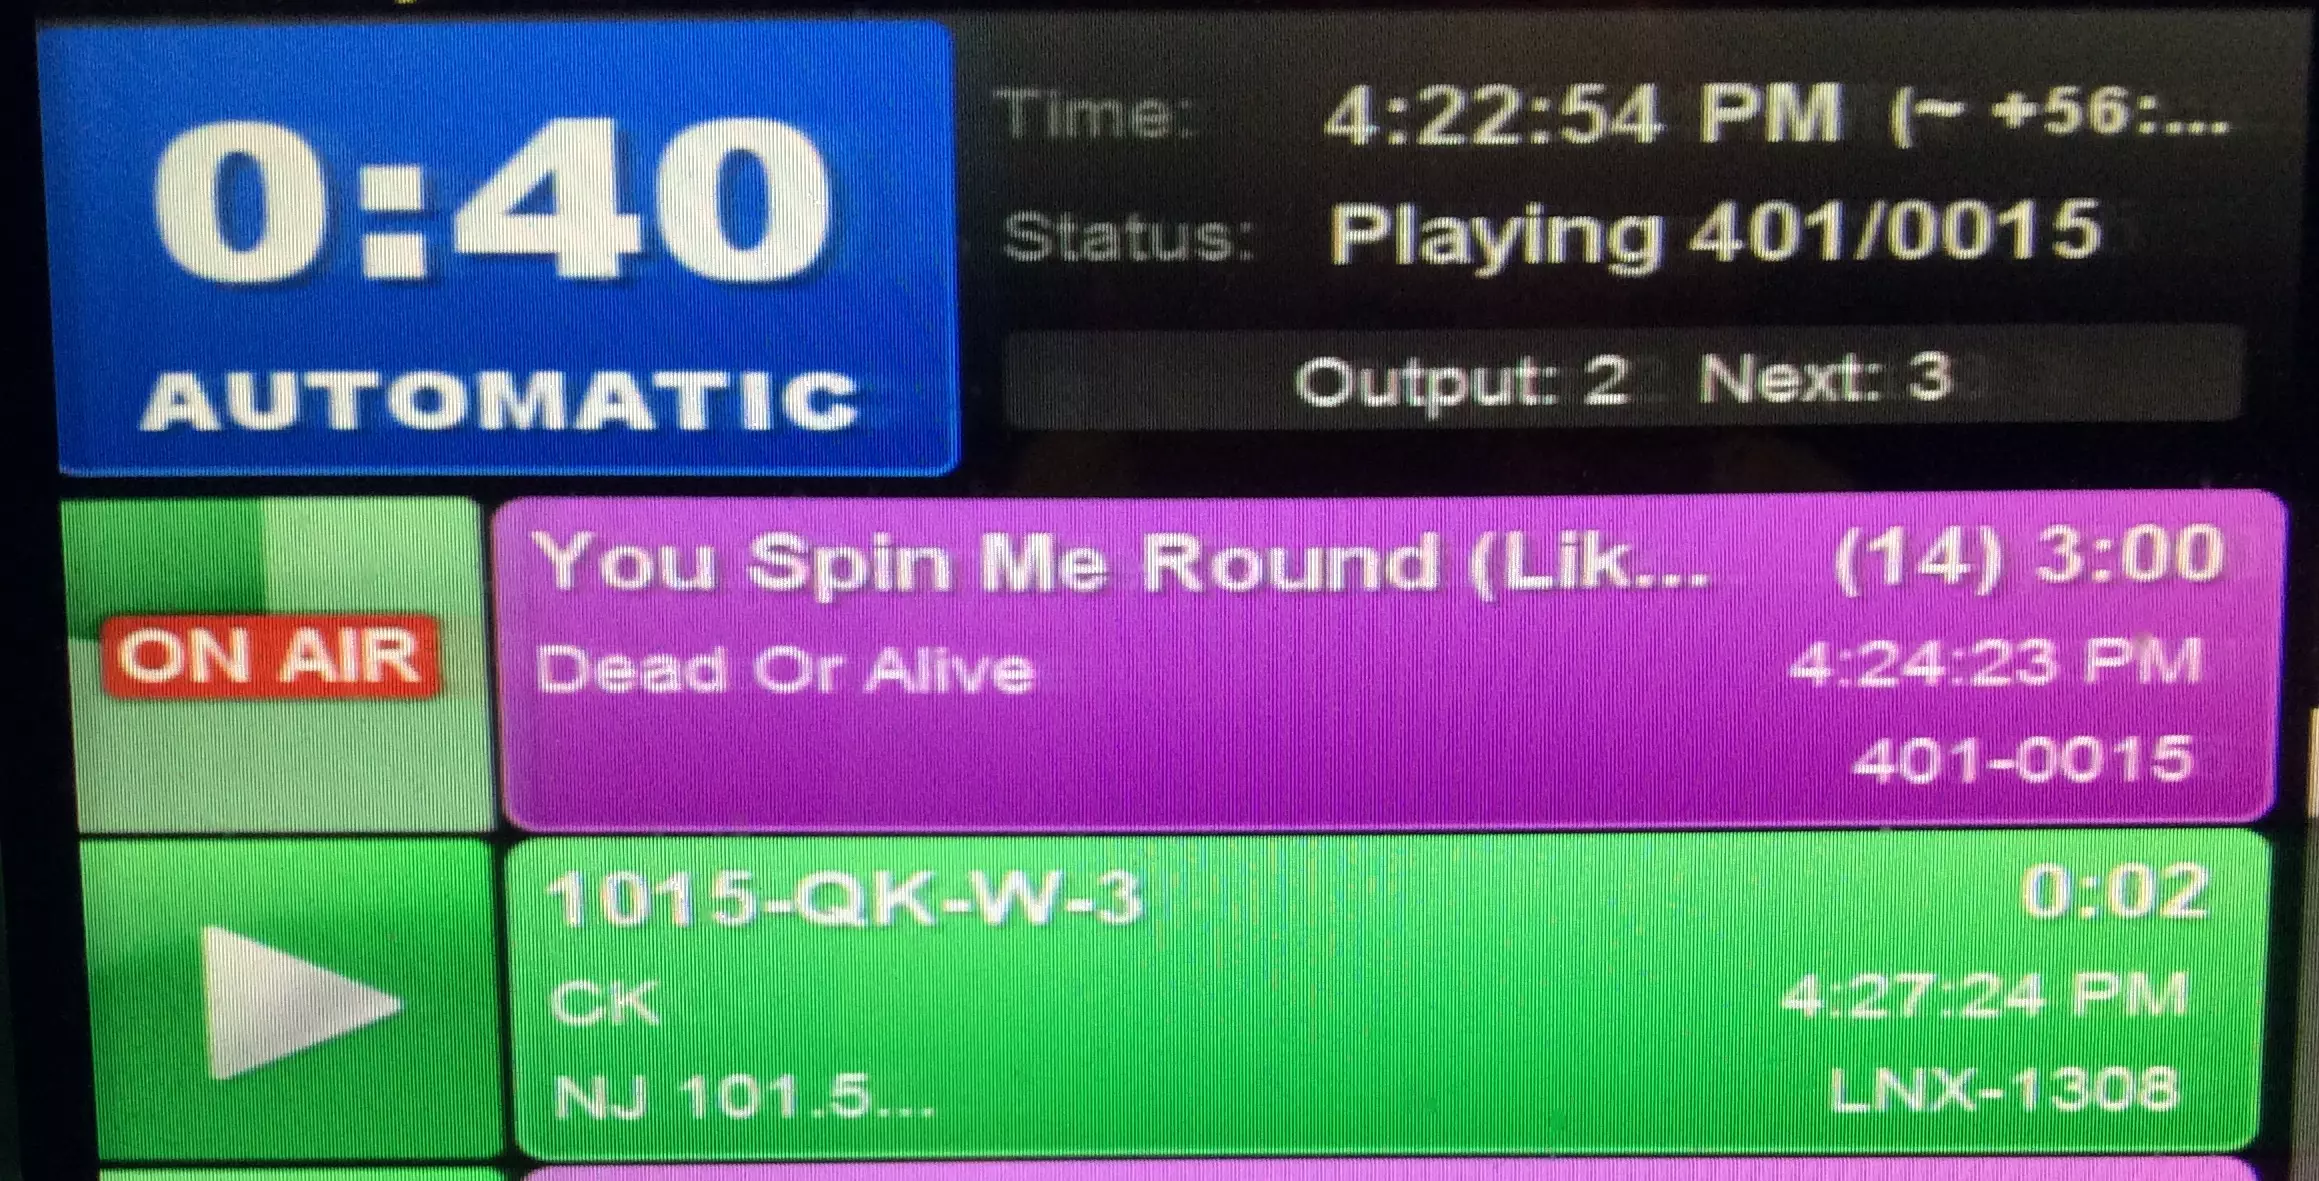 Dead Or Alive You spin me round 2003 Music video 